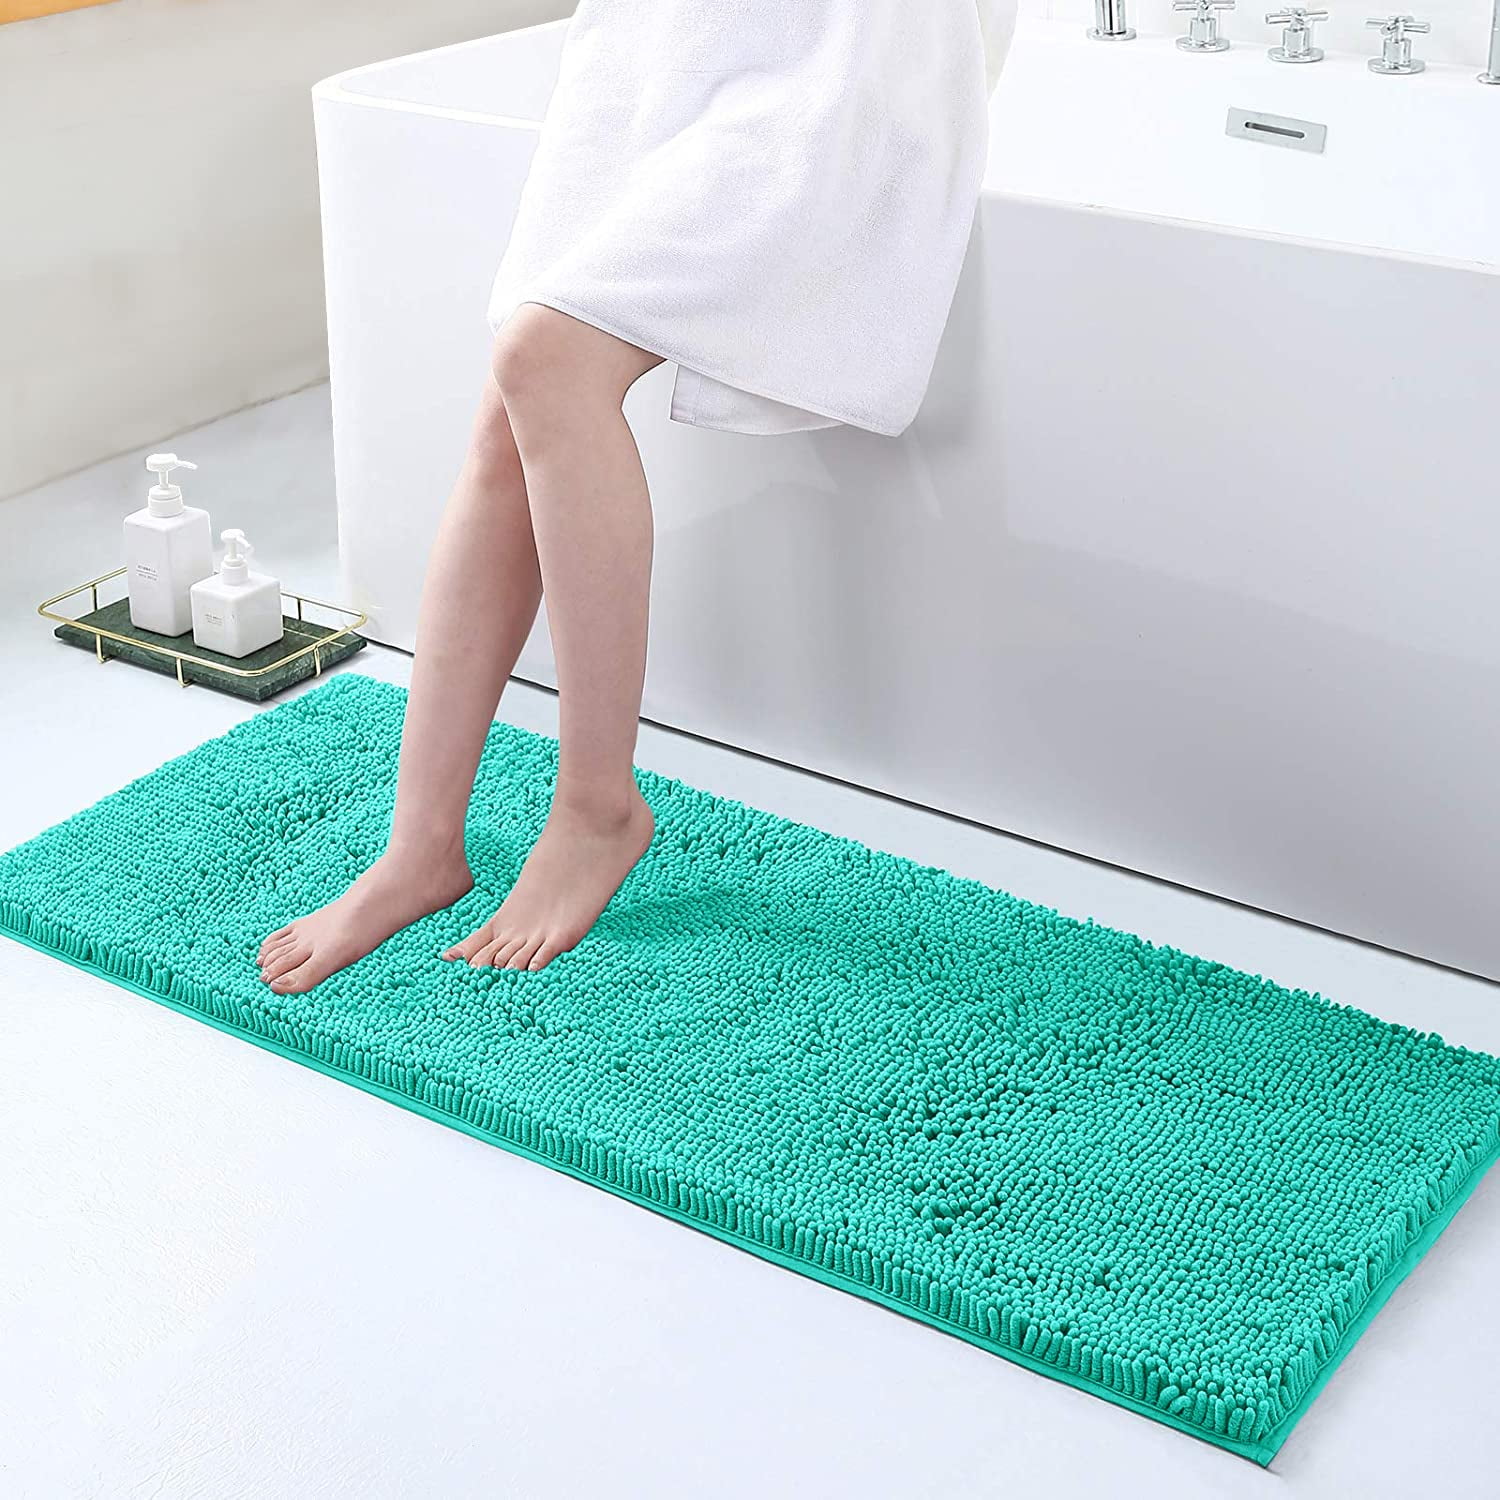 Yeaban Dark Teal Bathroom Rugs Sets 2 Piece – Thick Chenille Bath Mats |  Absorbent and Washable Bath Rug Non-Slip, Plush and Soft Rugs for Bathroom